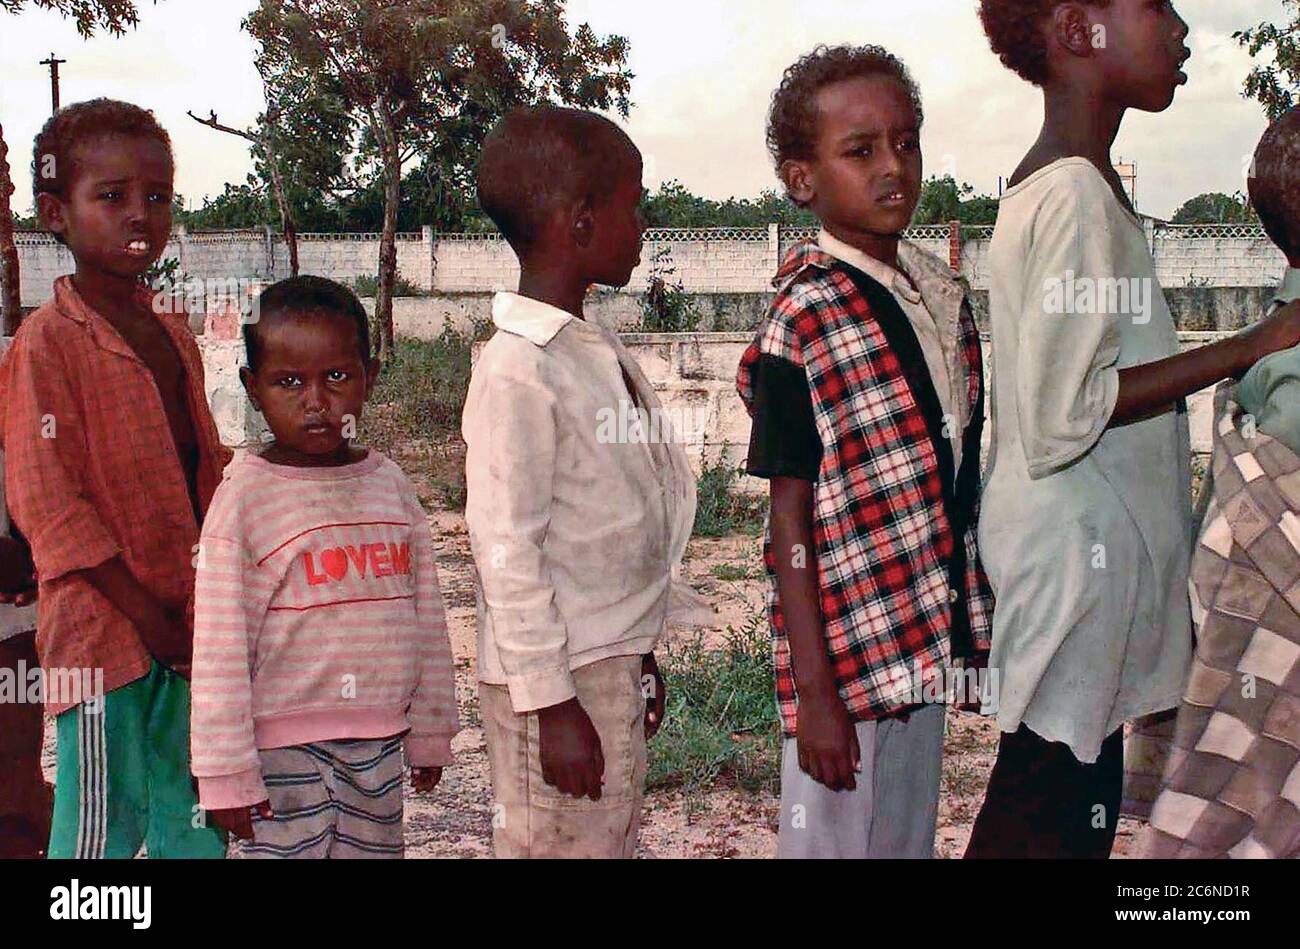 Six Somali boys wait in line patiently at an orphanage where US Navy medical personnel (not shown) were providing checkups for the children.  The orphanage is just outside of Mogadishu.  US Navy and Air Force medical personnel met up with a civilian care group (not shown) to assist in giving check-ups to the children in the orphanage.  Once word got out that there was a medical team in town, women from the local area started bringing their children (not shown).  The team tried to see as many as possible, but supplies quickly ran out.  This mission is in direct support of Operation Restore Hope Stock Photo